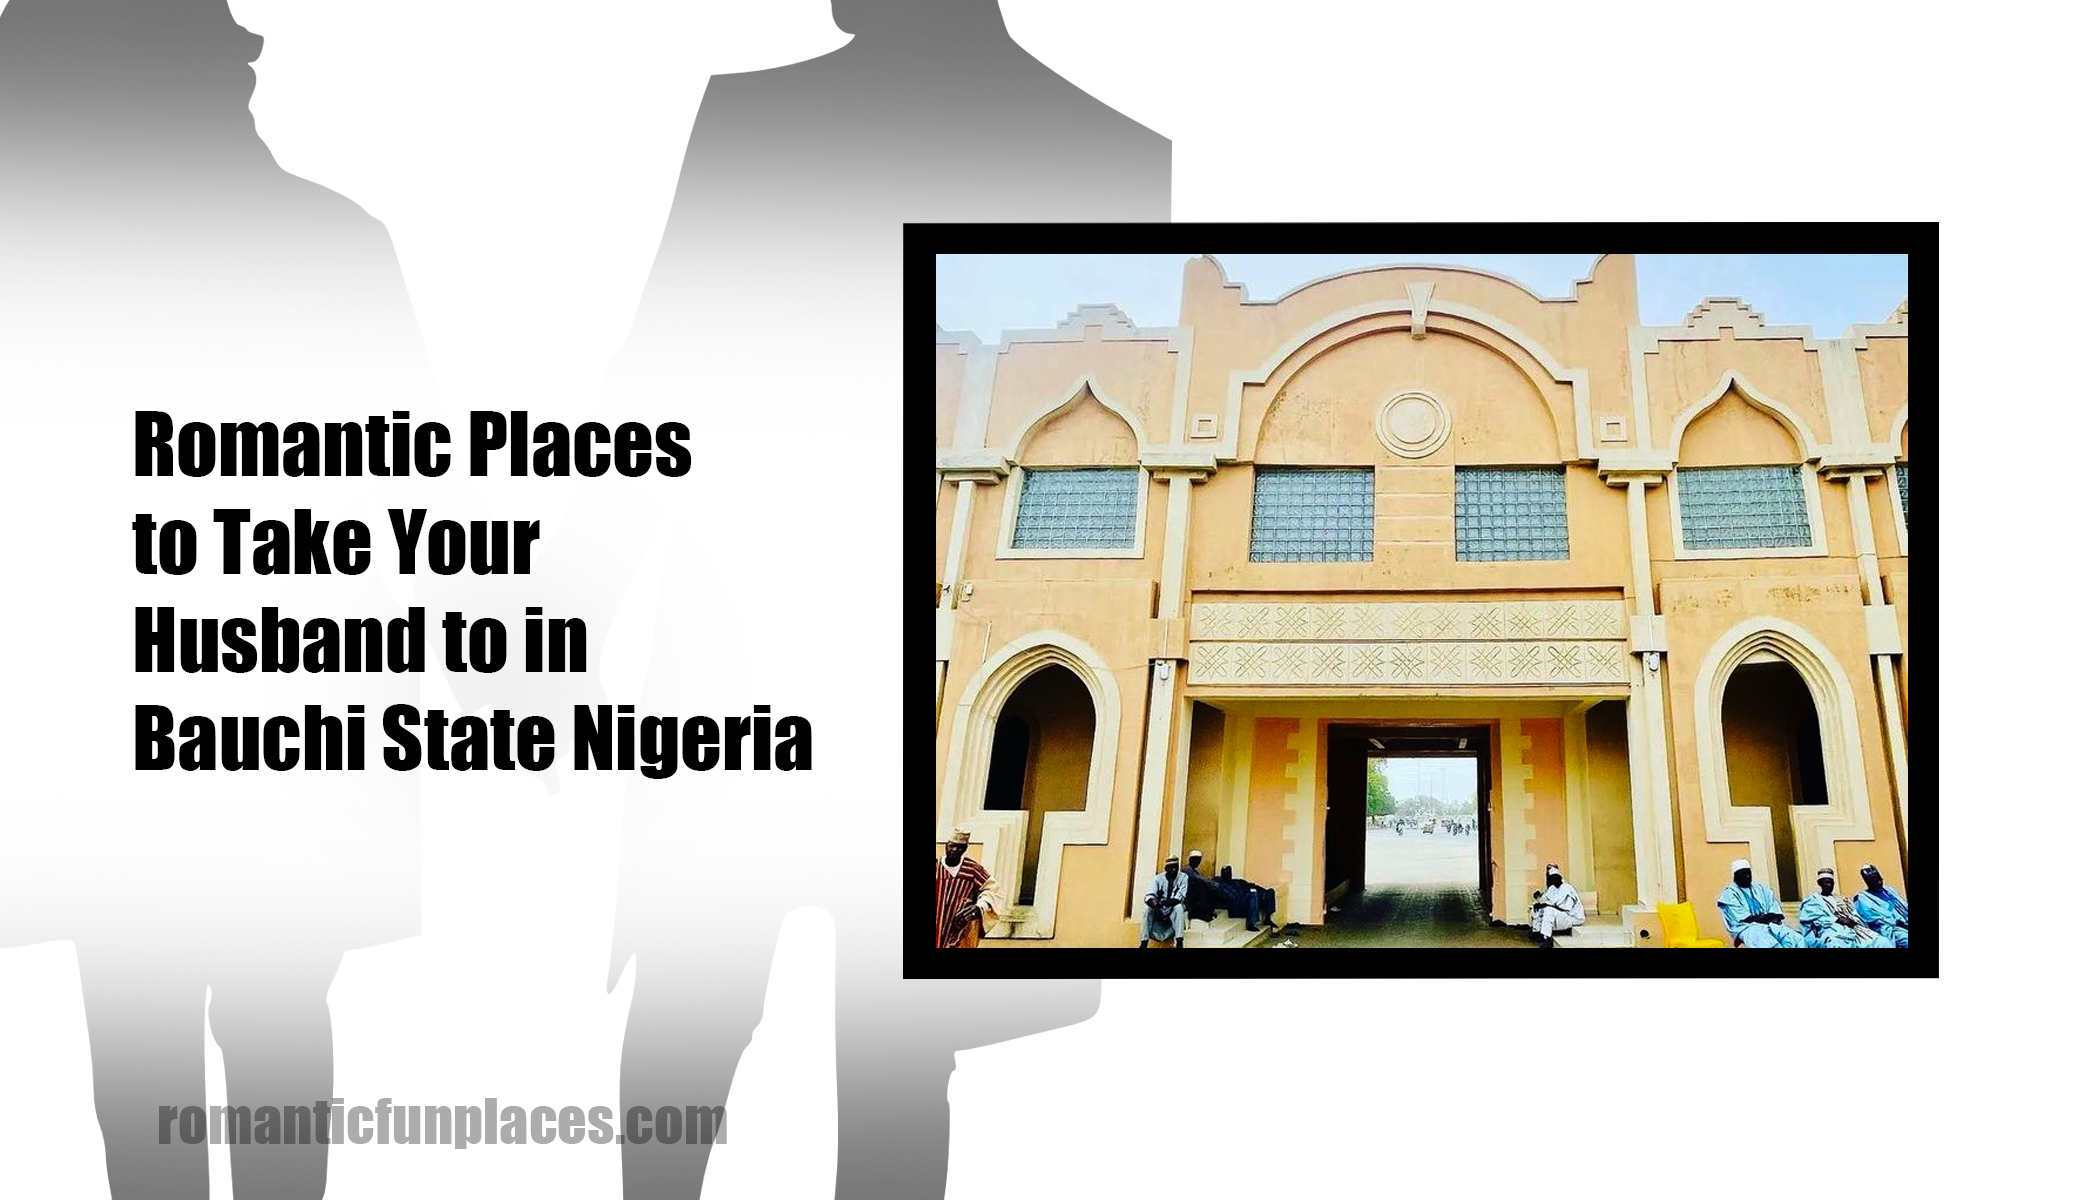 Romantic Places to Take Your Husband to in Bauchi State Nigeria